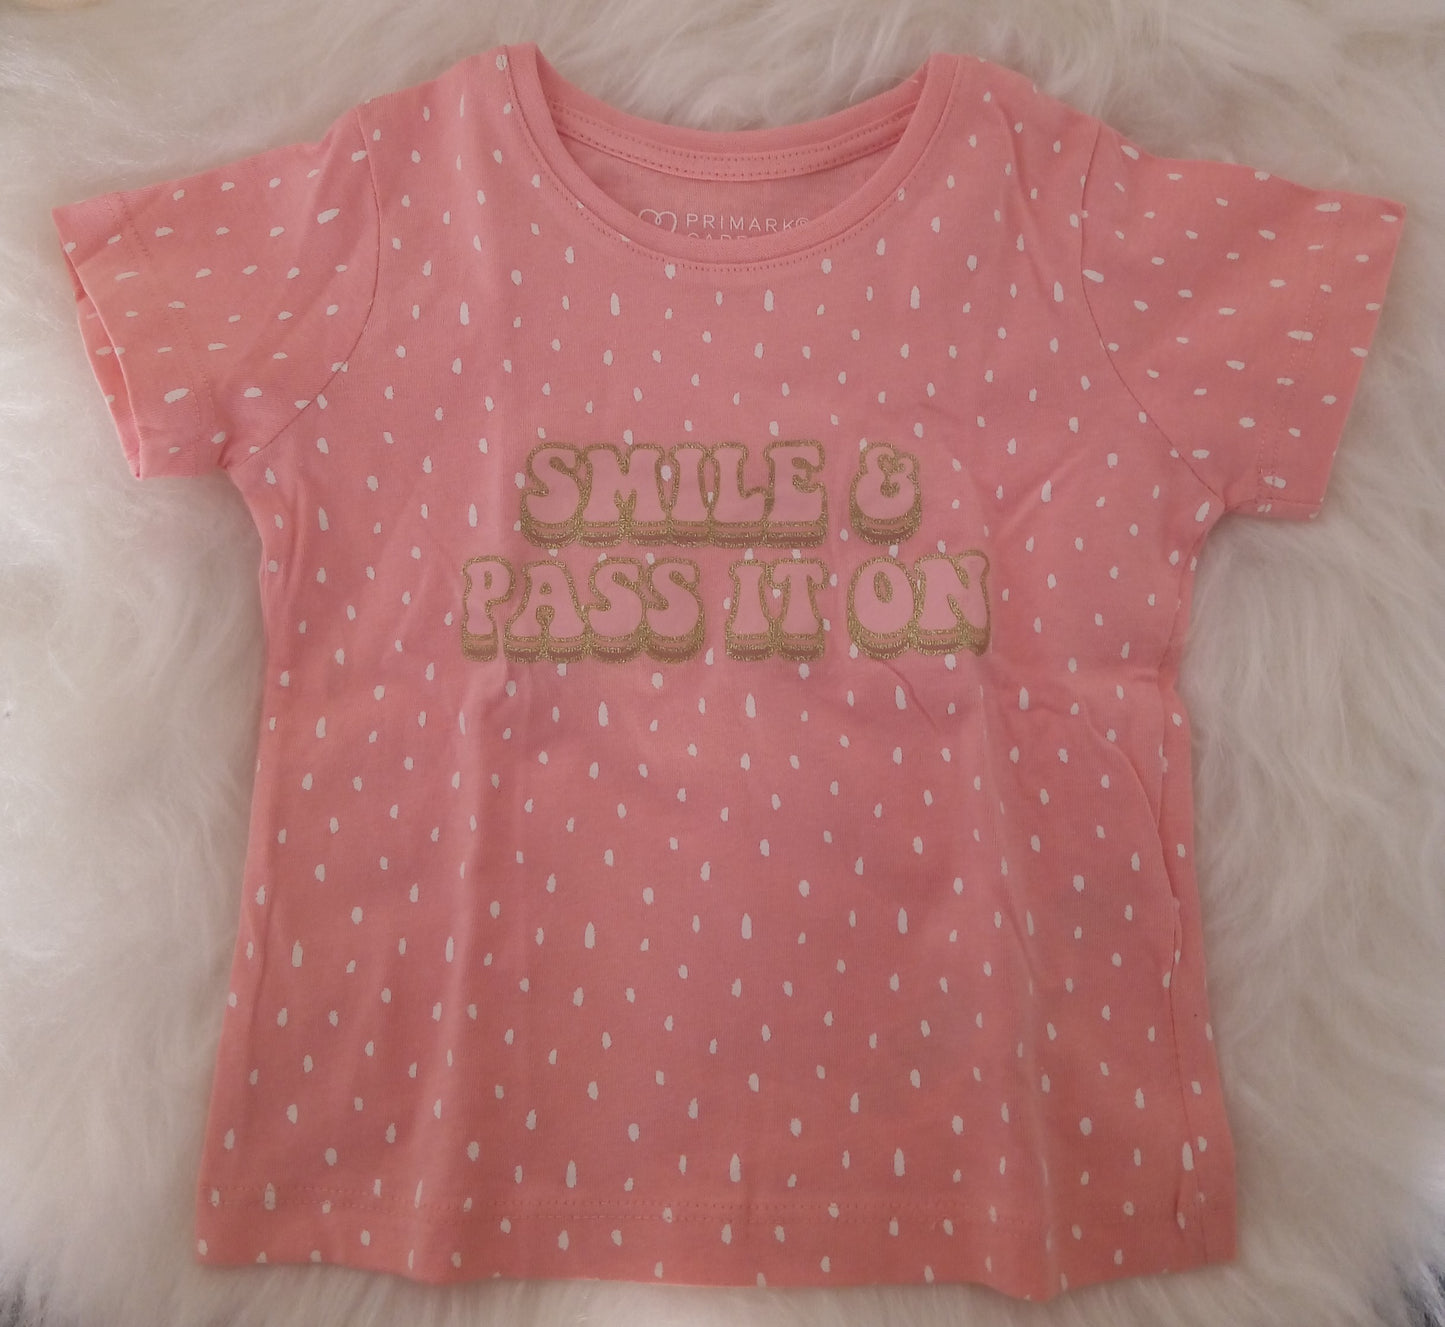 PRIMARK SMILE AND PASS IT ON KIDS T-SHIRT LIGHT PINK